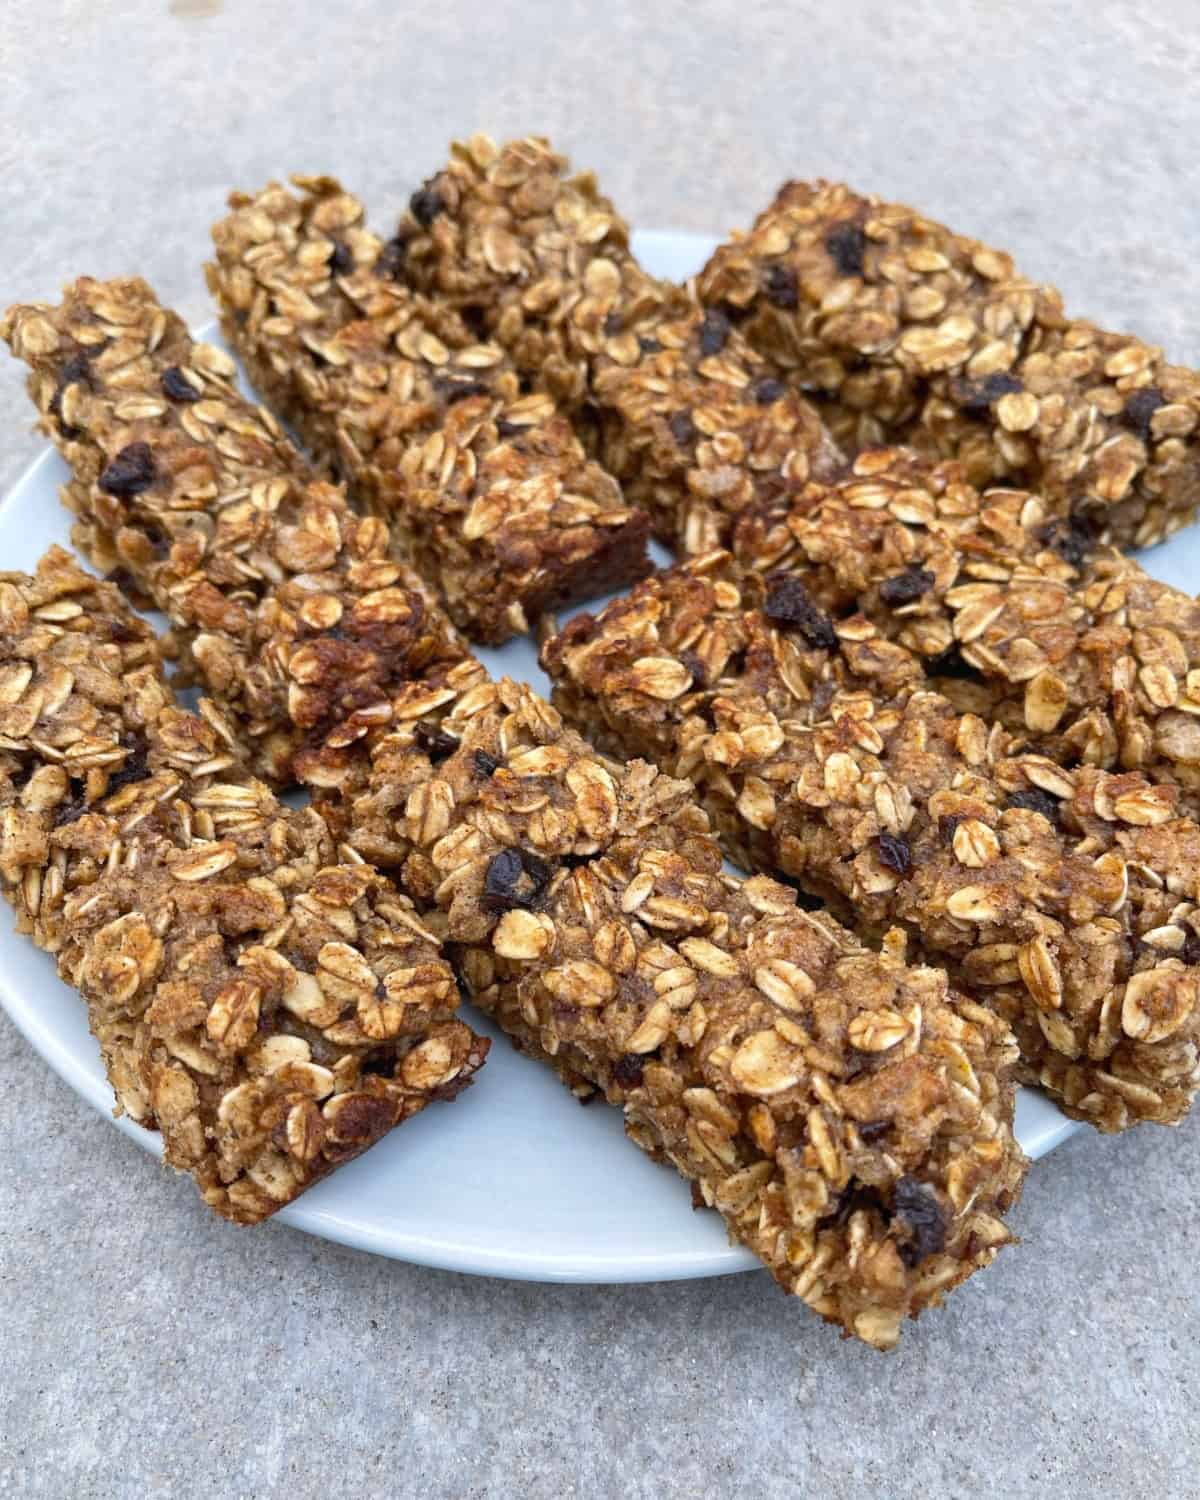 Eight gluten-free oatmeal spice bars with raisins on round serving platter.